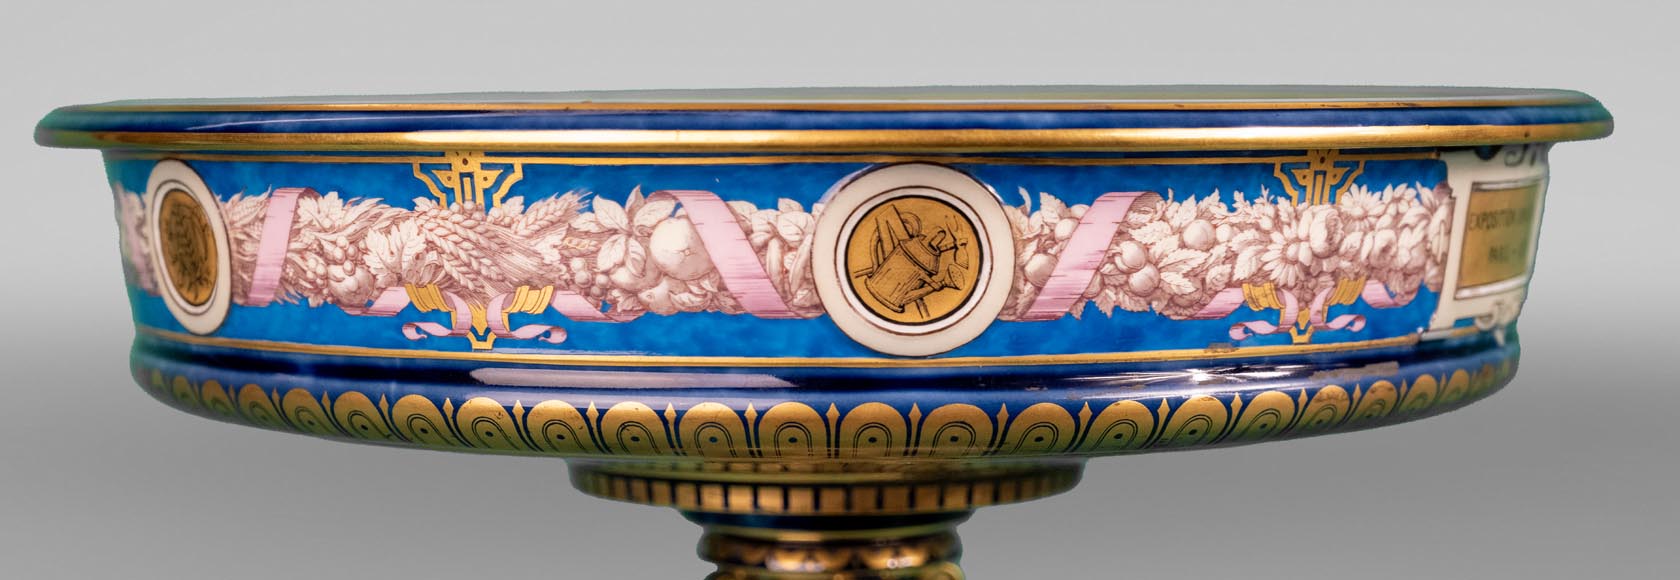 SÈVRES Manufacture, Winner's cup from the 1878 Universal Exhibition-3